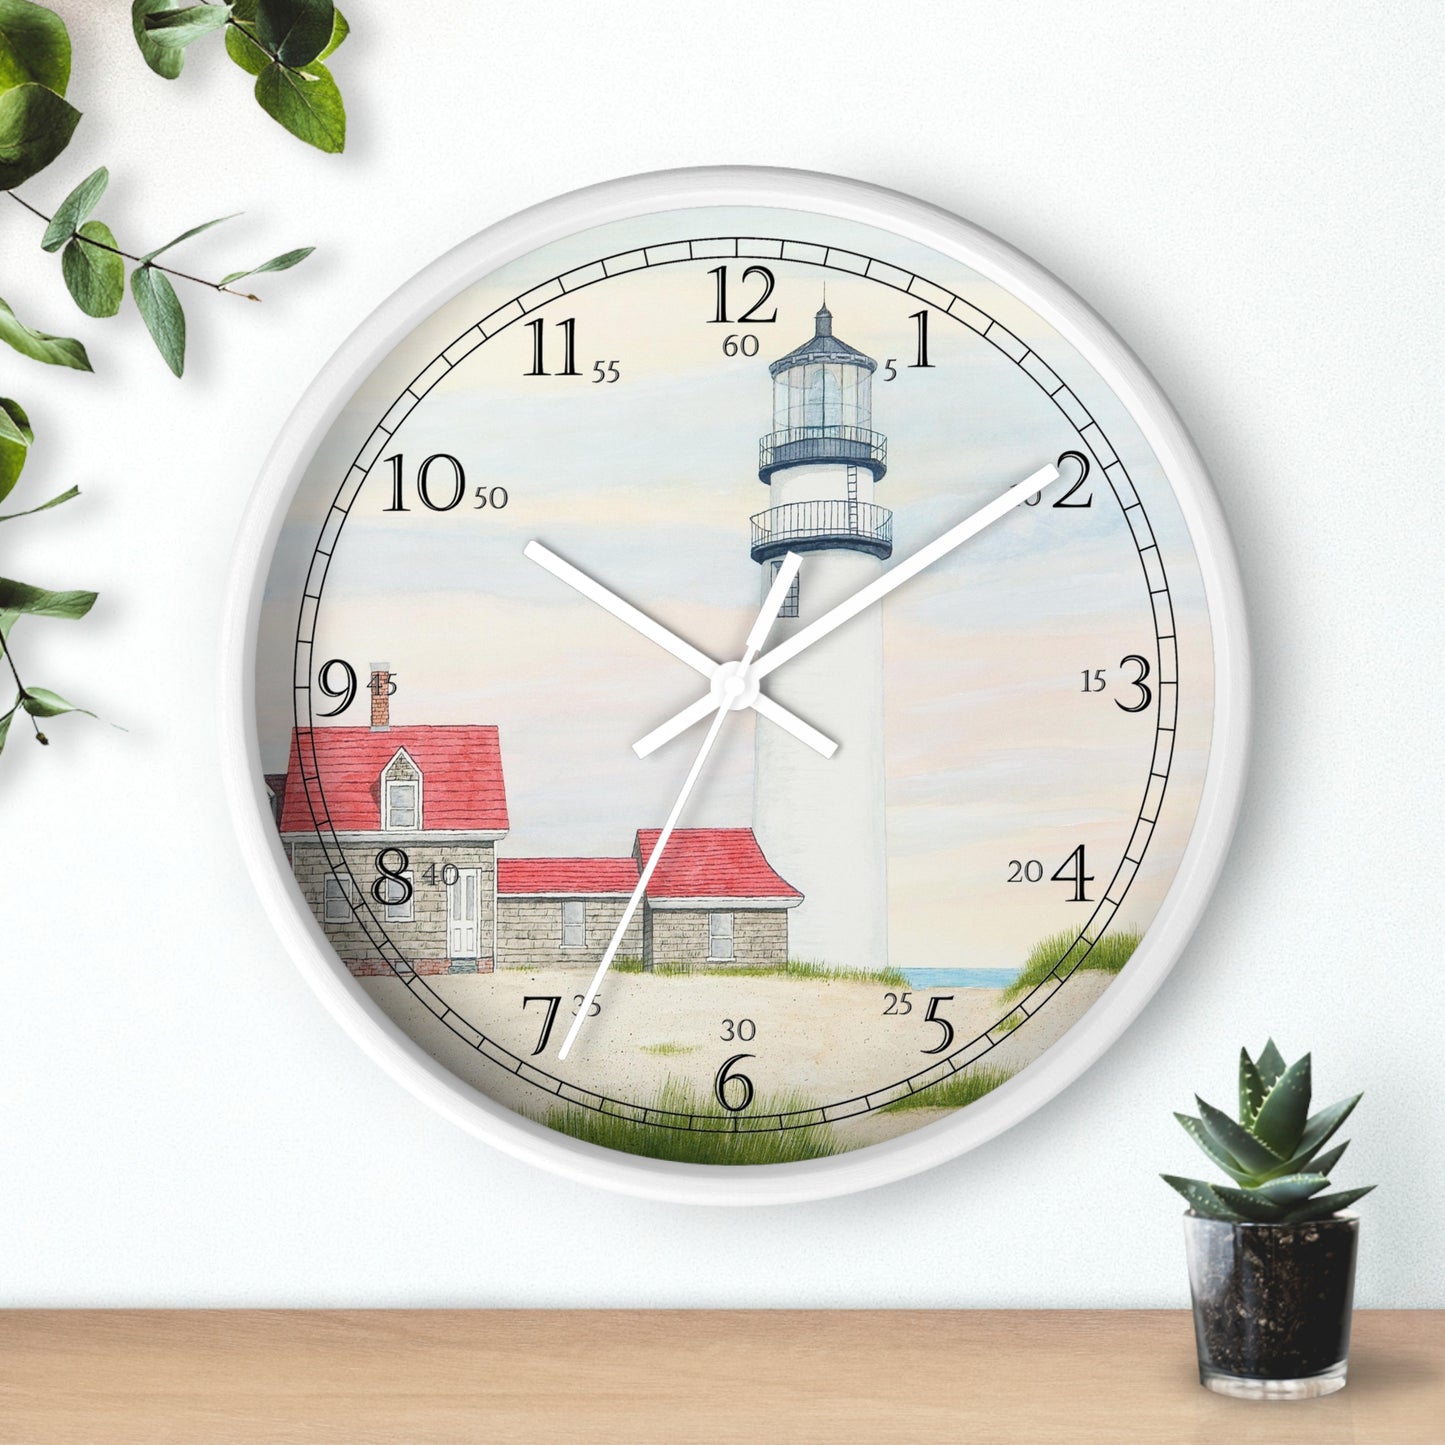 Stiff Breeze At Day's End English Numeral Clock